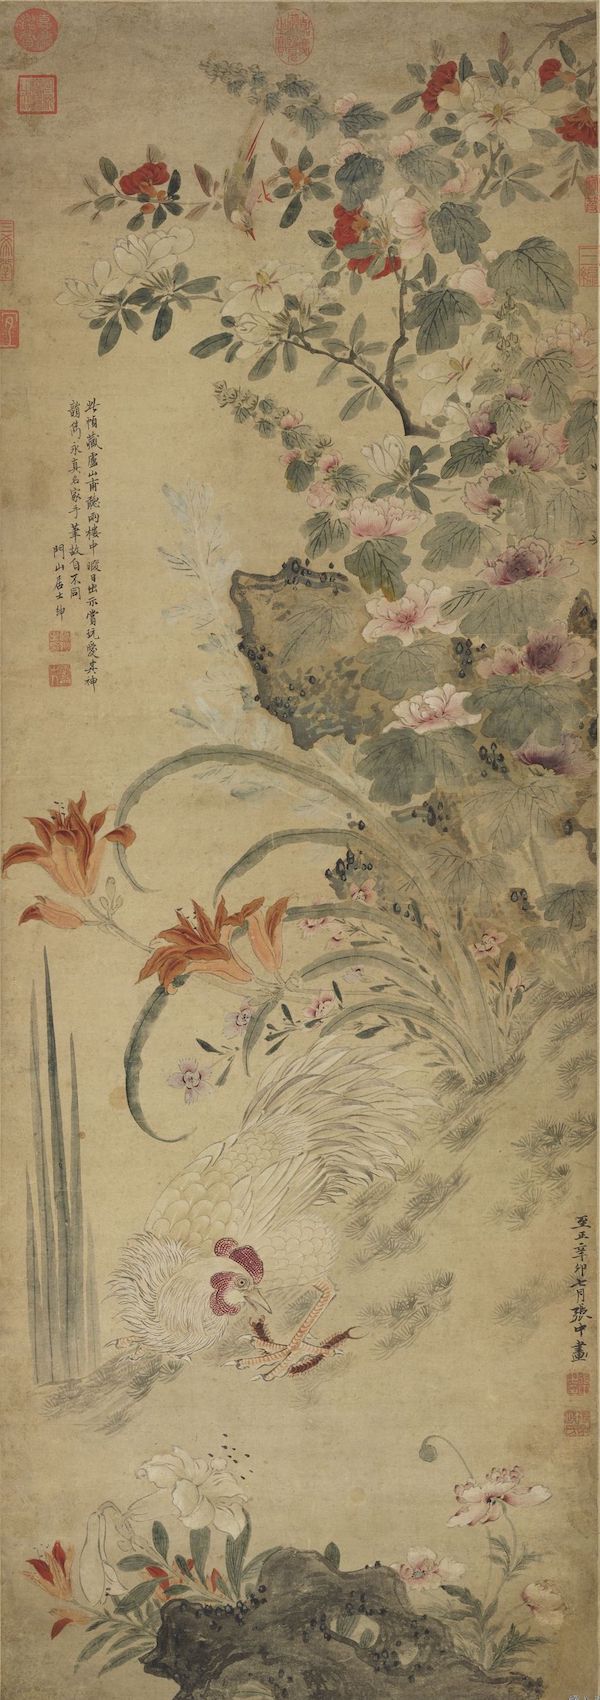 (Biography) Yuan Zhang Zhong, Sketches of Flowers and Birds, Scroll, Collection of the National Palace Museum, Taipei